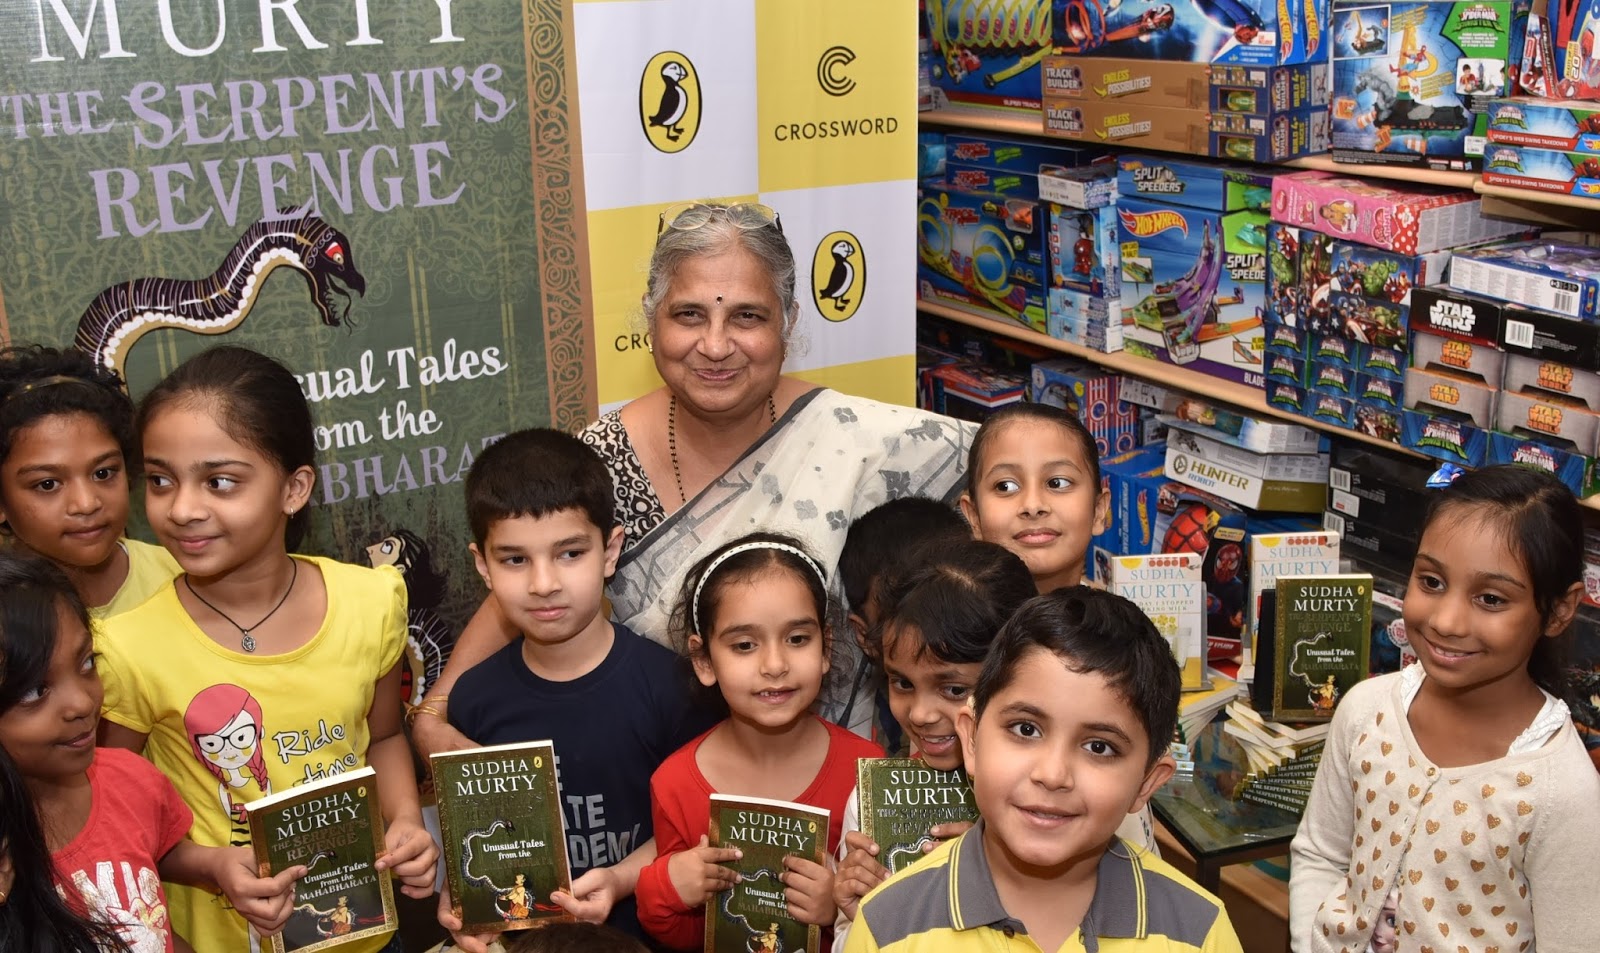 Sudha Murty along with kids fan unveiling The Serpents Revenge unusual talks from the Mahabharata- First book in the Mythology genre at Crossword Bookstore Mumbai